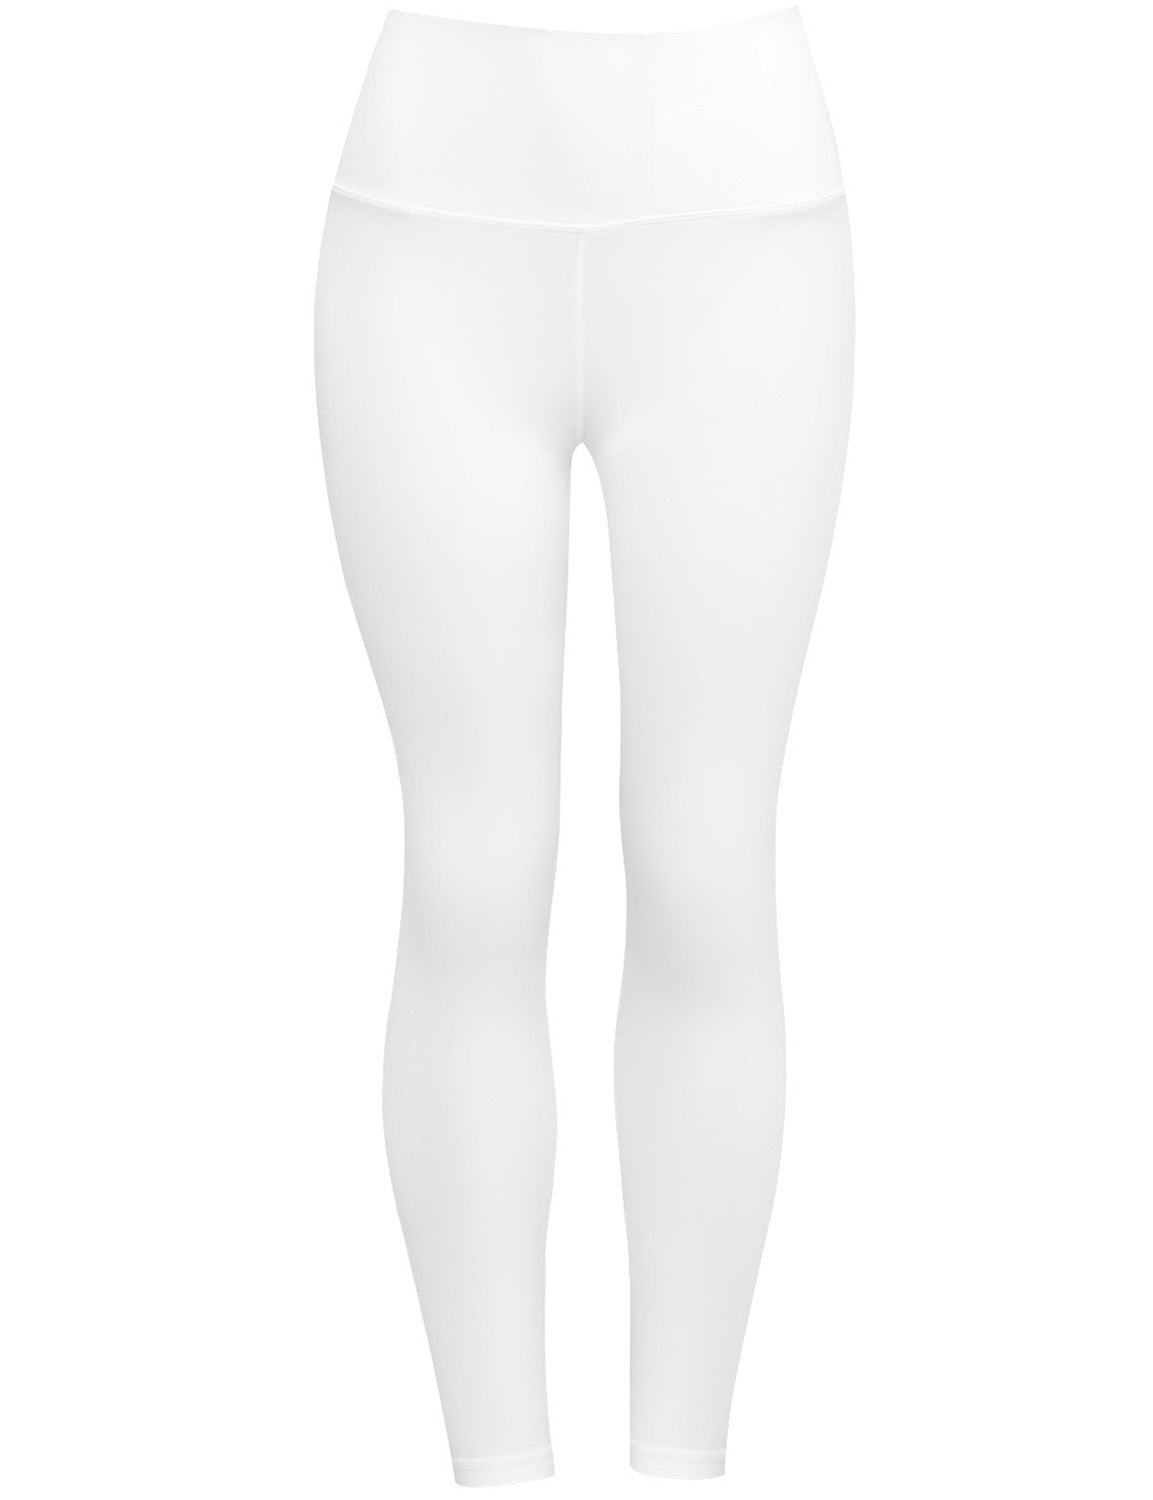 High Waist Golf Pants white 75%Nylon/25%Spandex Fabric doesn't attract lint easily 4-way stretch No see-through Moisture-wicking Tummy control Inner pocket Four lengths